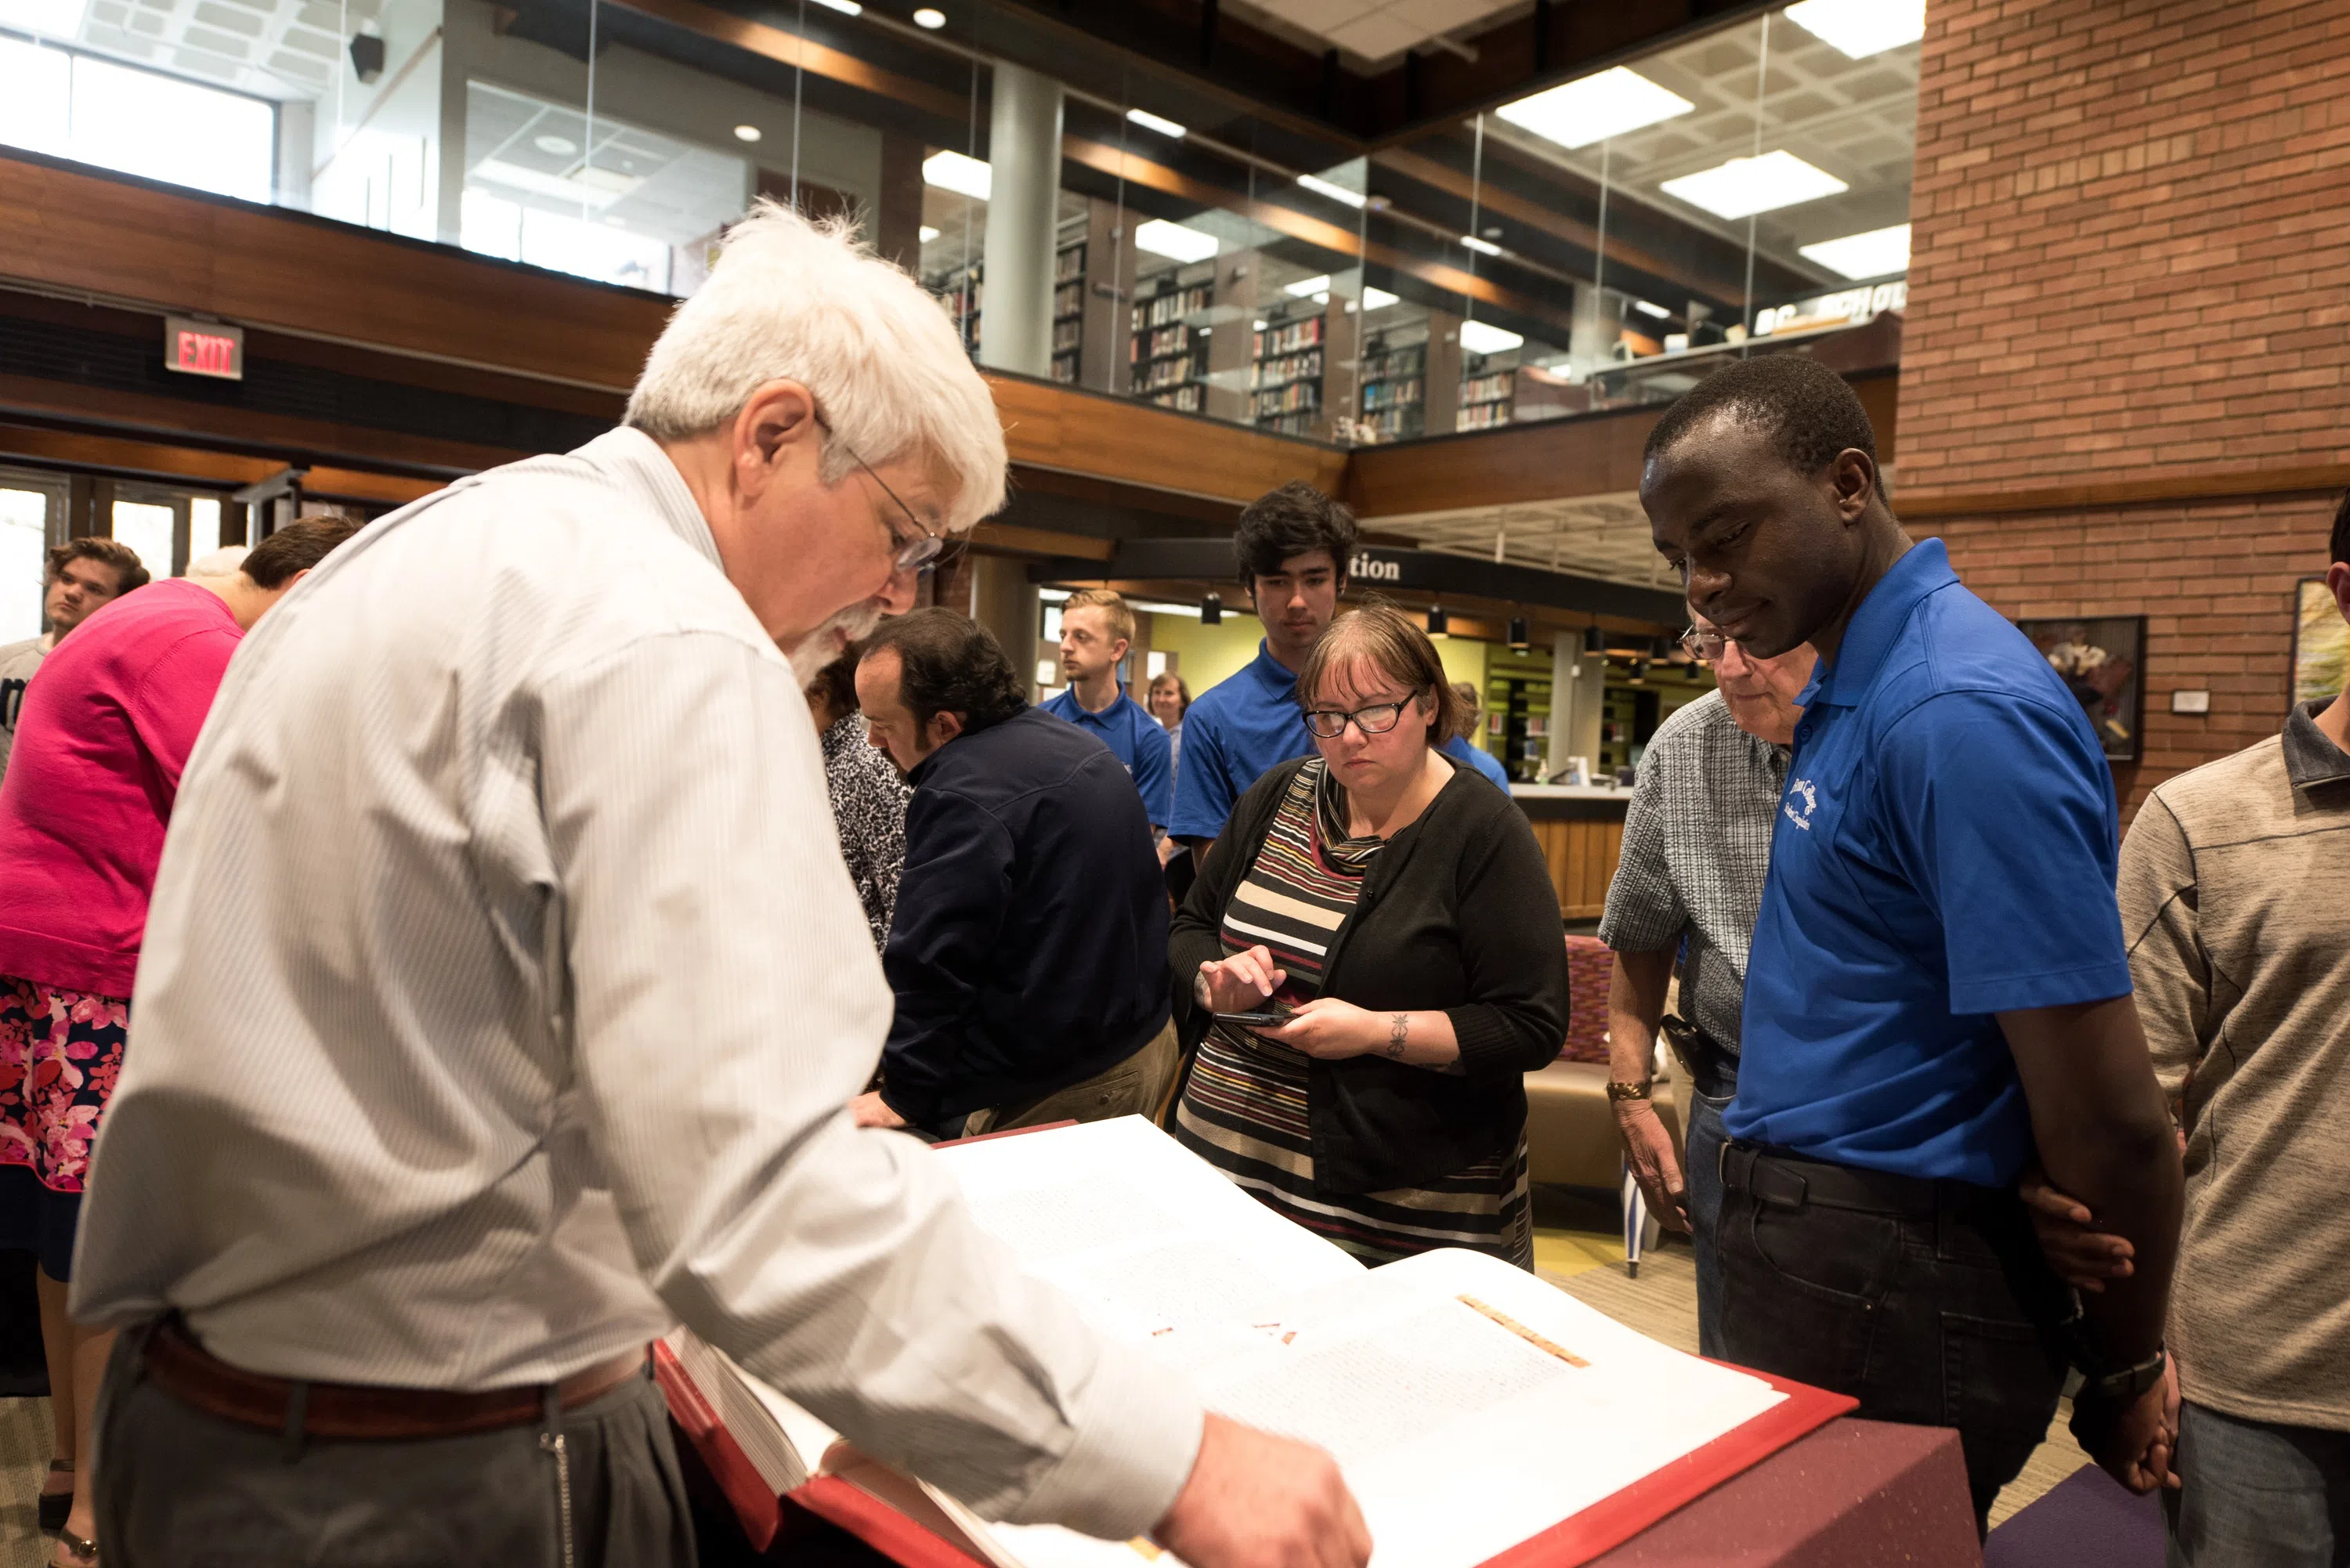 Students look over the St. Johns Bible in the atrium of the library.